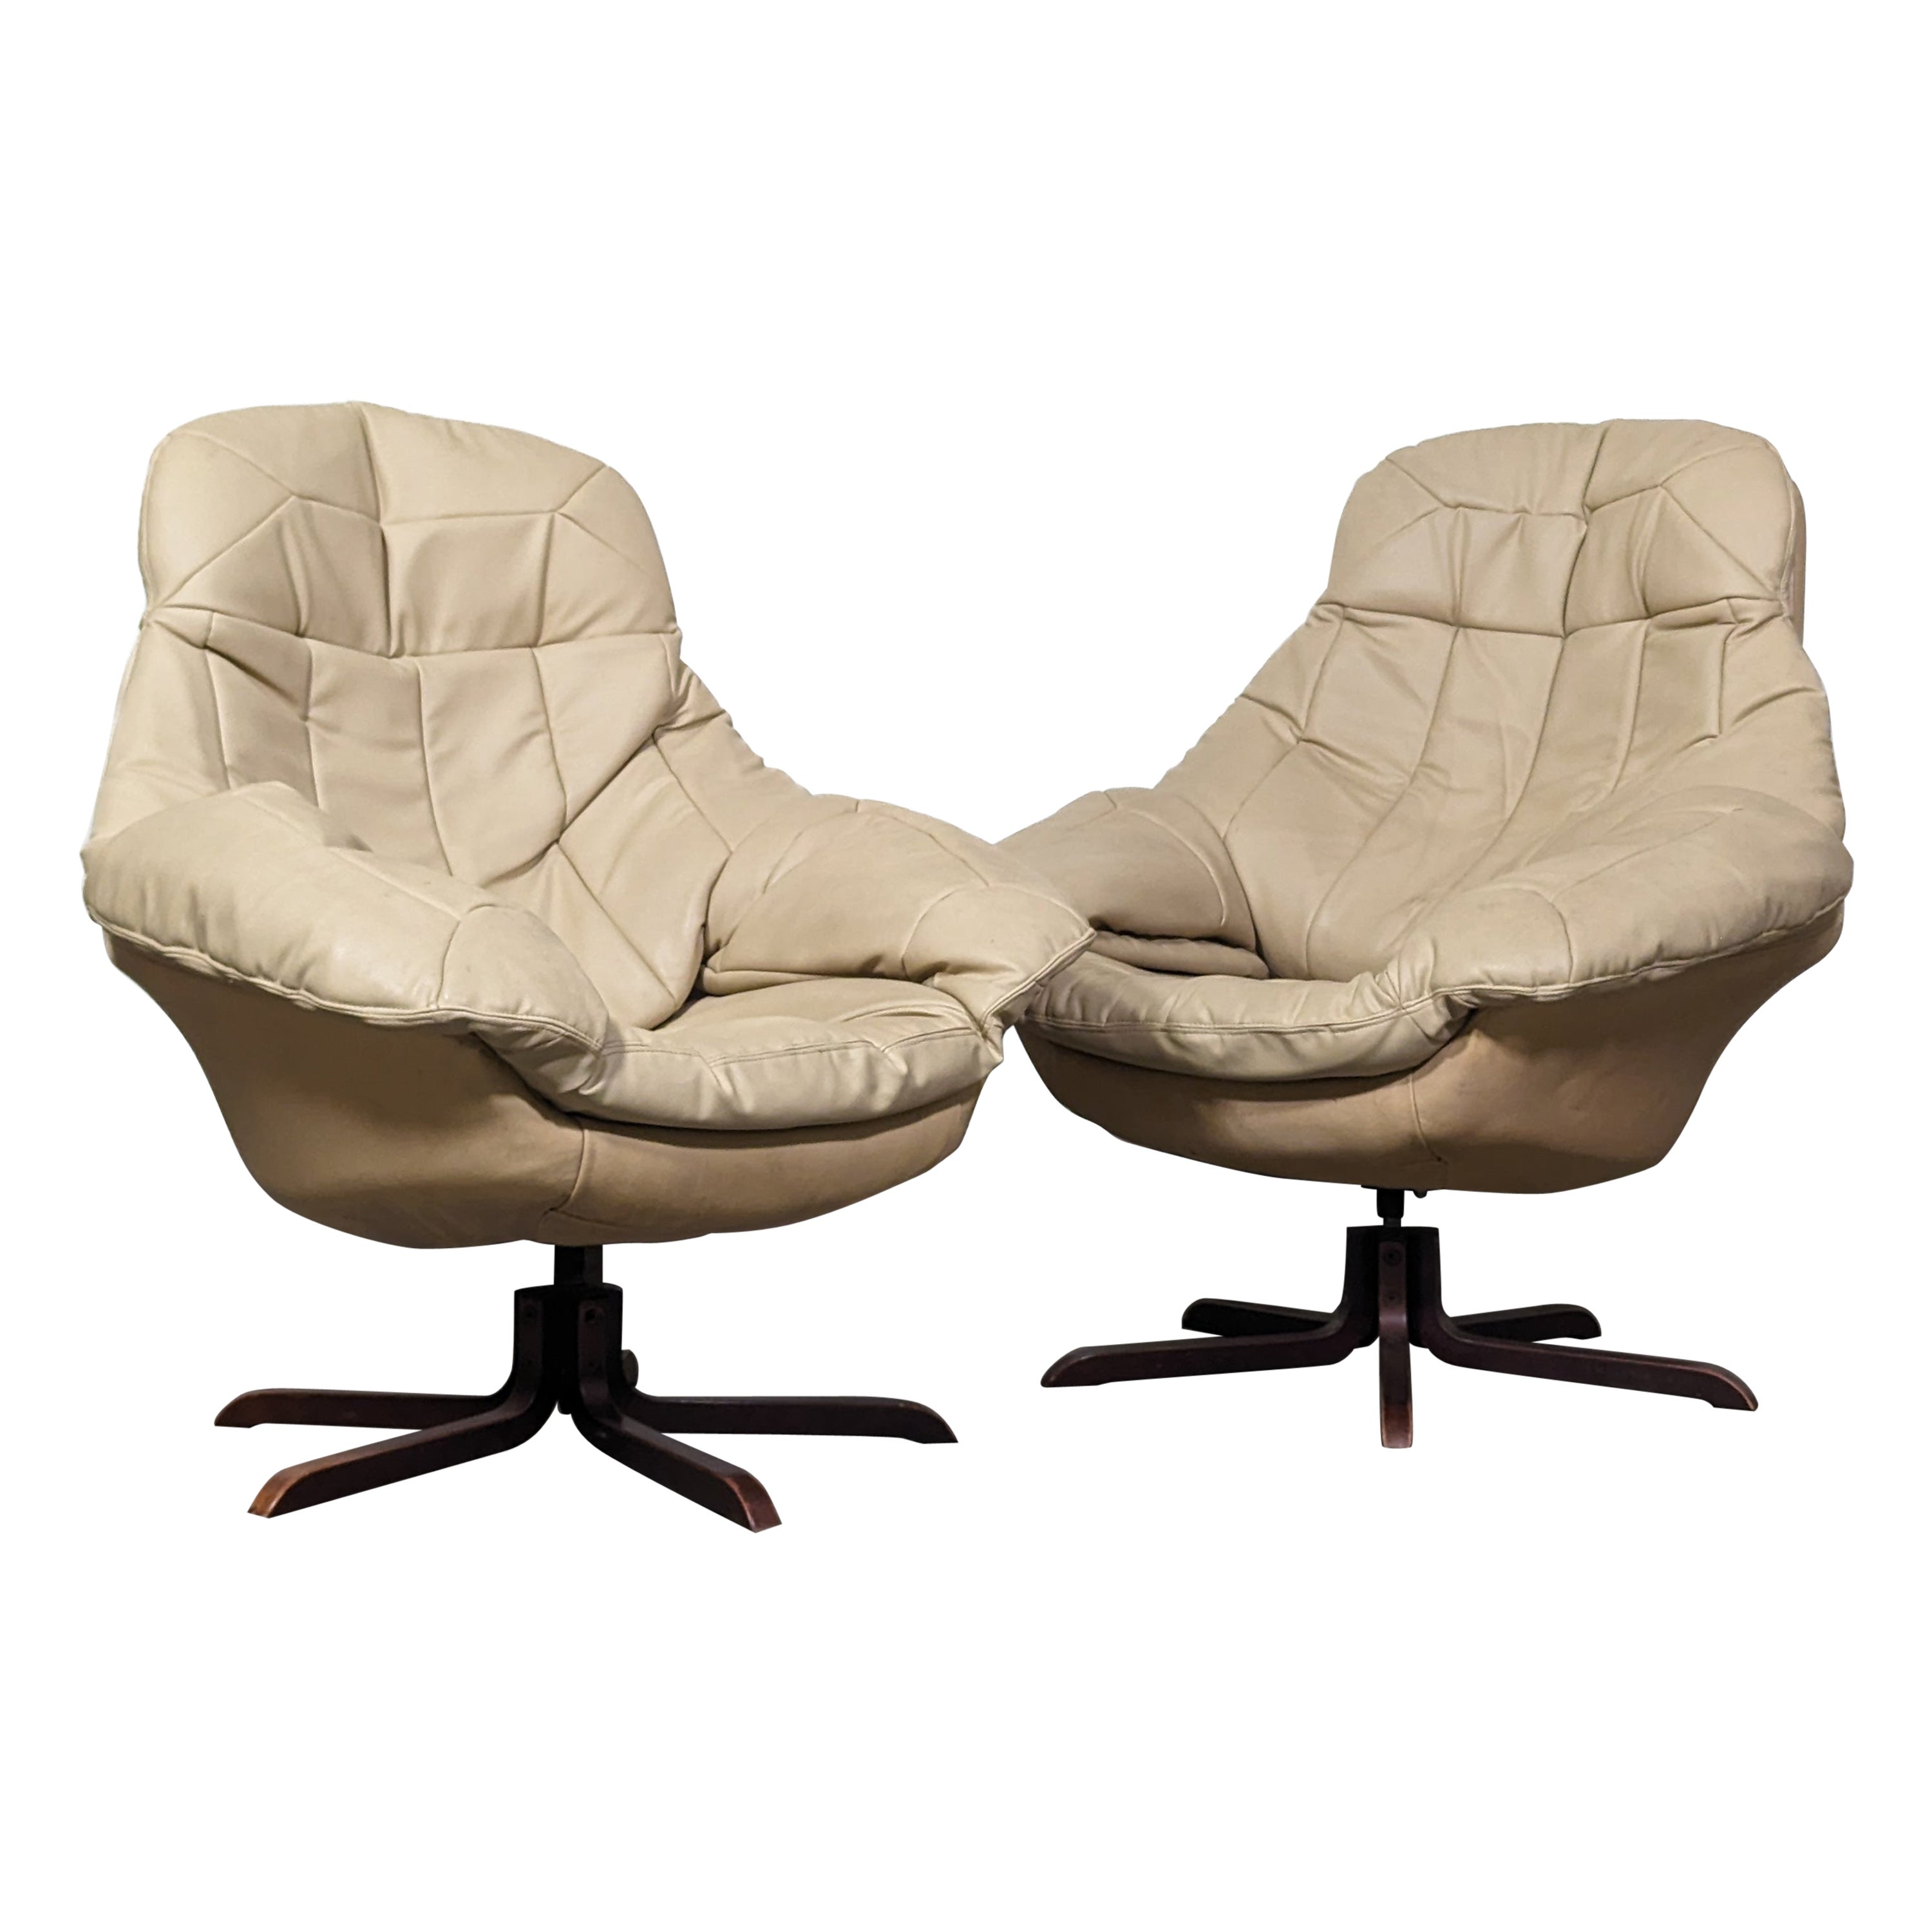 Mid Century Modern Swivel Leather Lounge Chairs by H.W. Klein for Bramin, c1970s For Sale